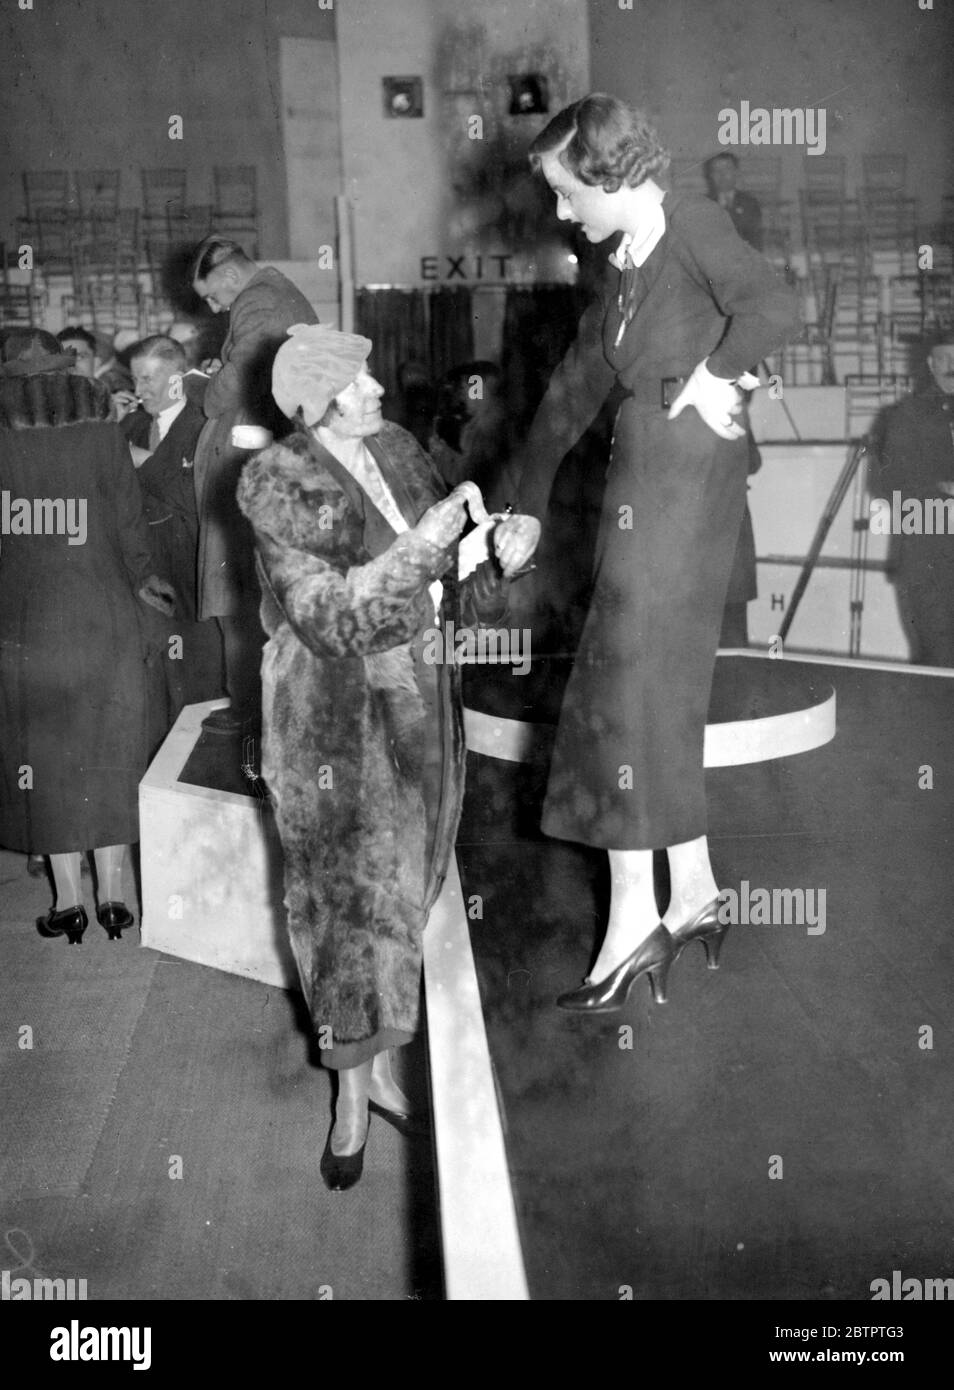 British Industries Fair at White City. Miss F. Horsburgh, M.P. (Dundee) inspecting one of the dresses worn by a mannequin in the fashion section. 27 February 1935 Stock Photo